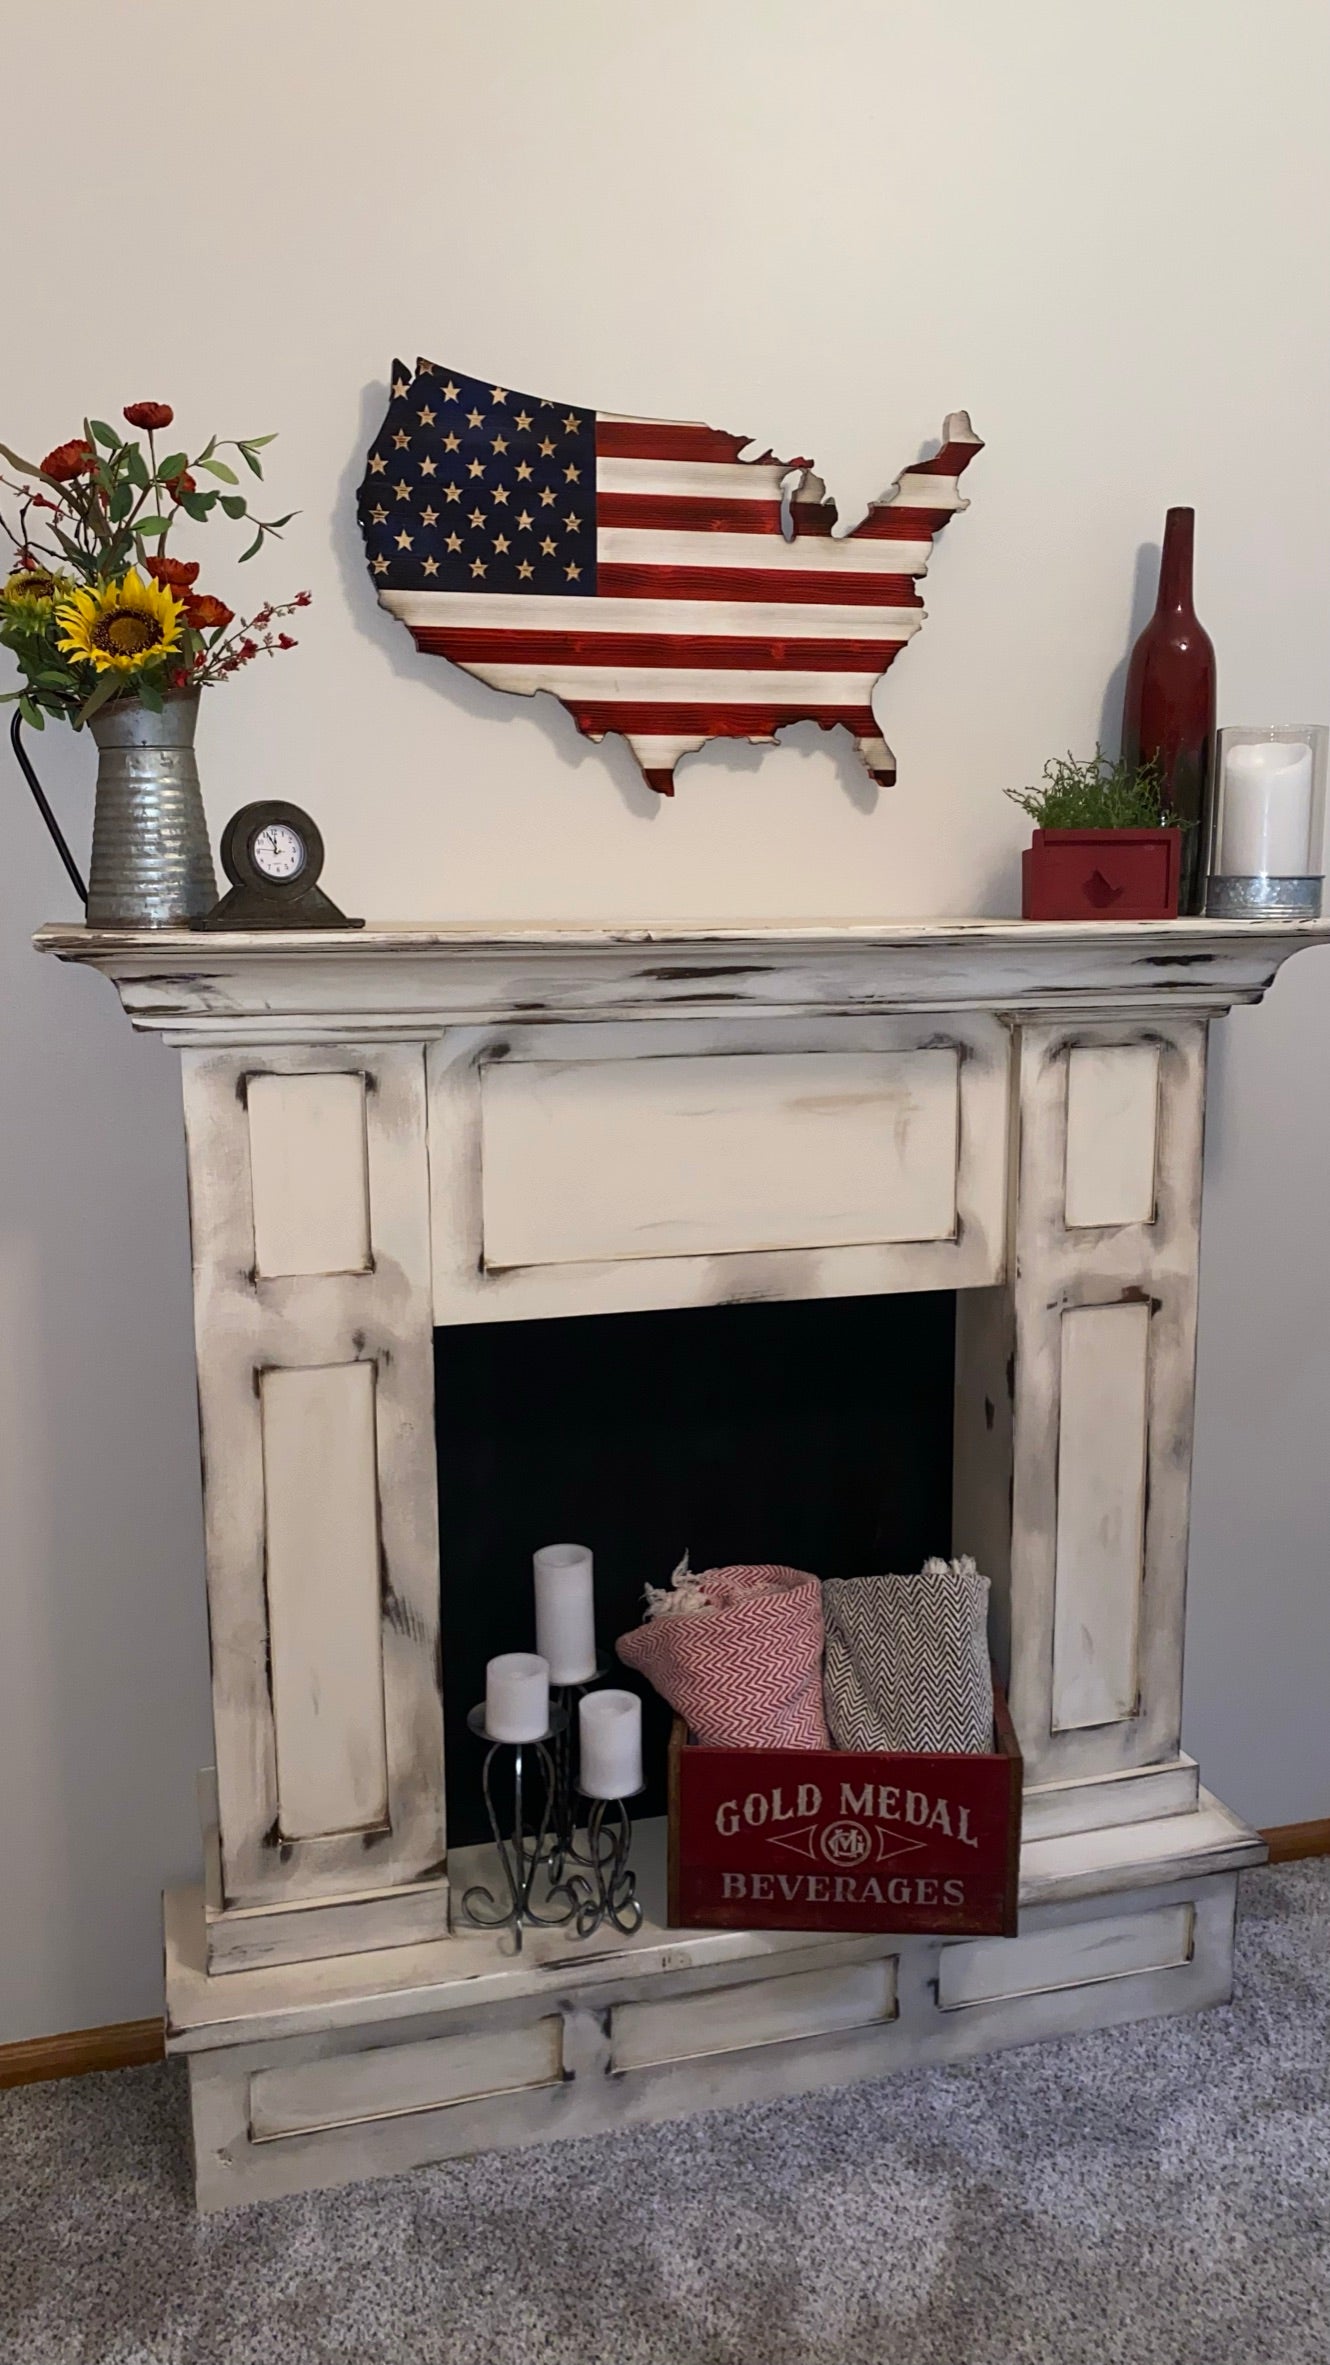 The Original Red, White and Blue Wooden Continental Rustic USA flag